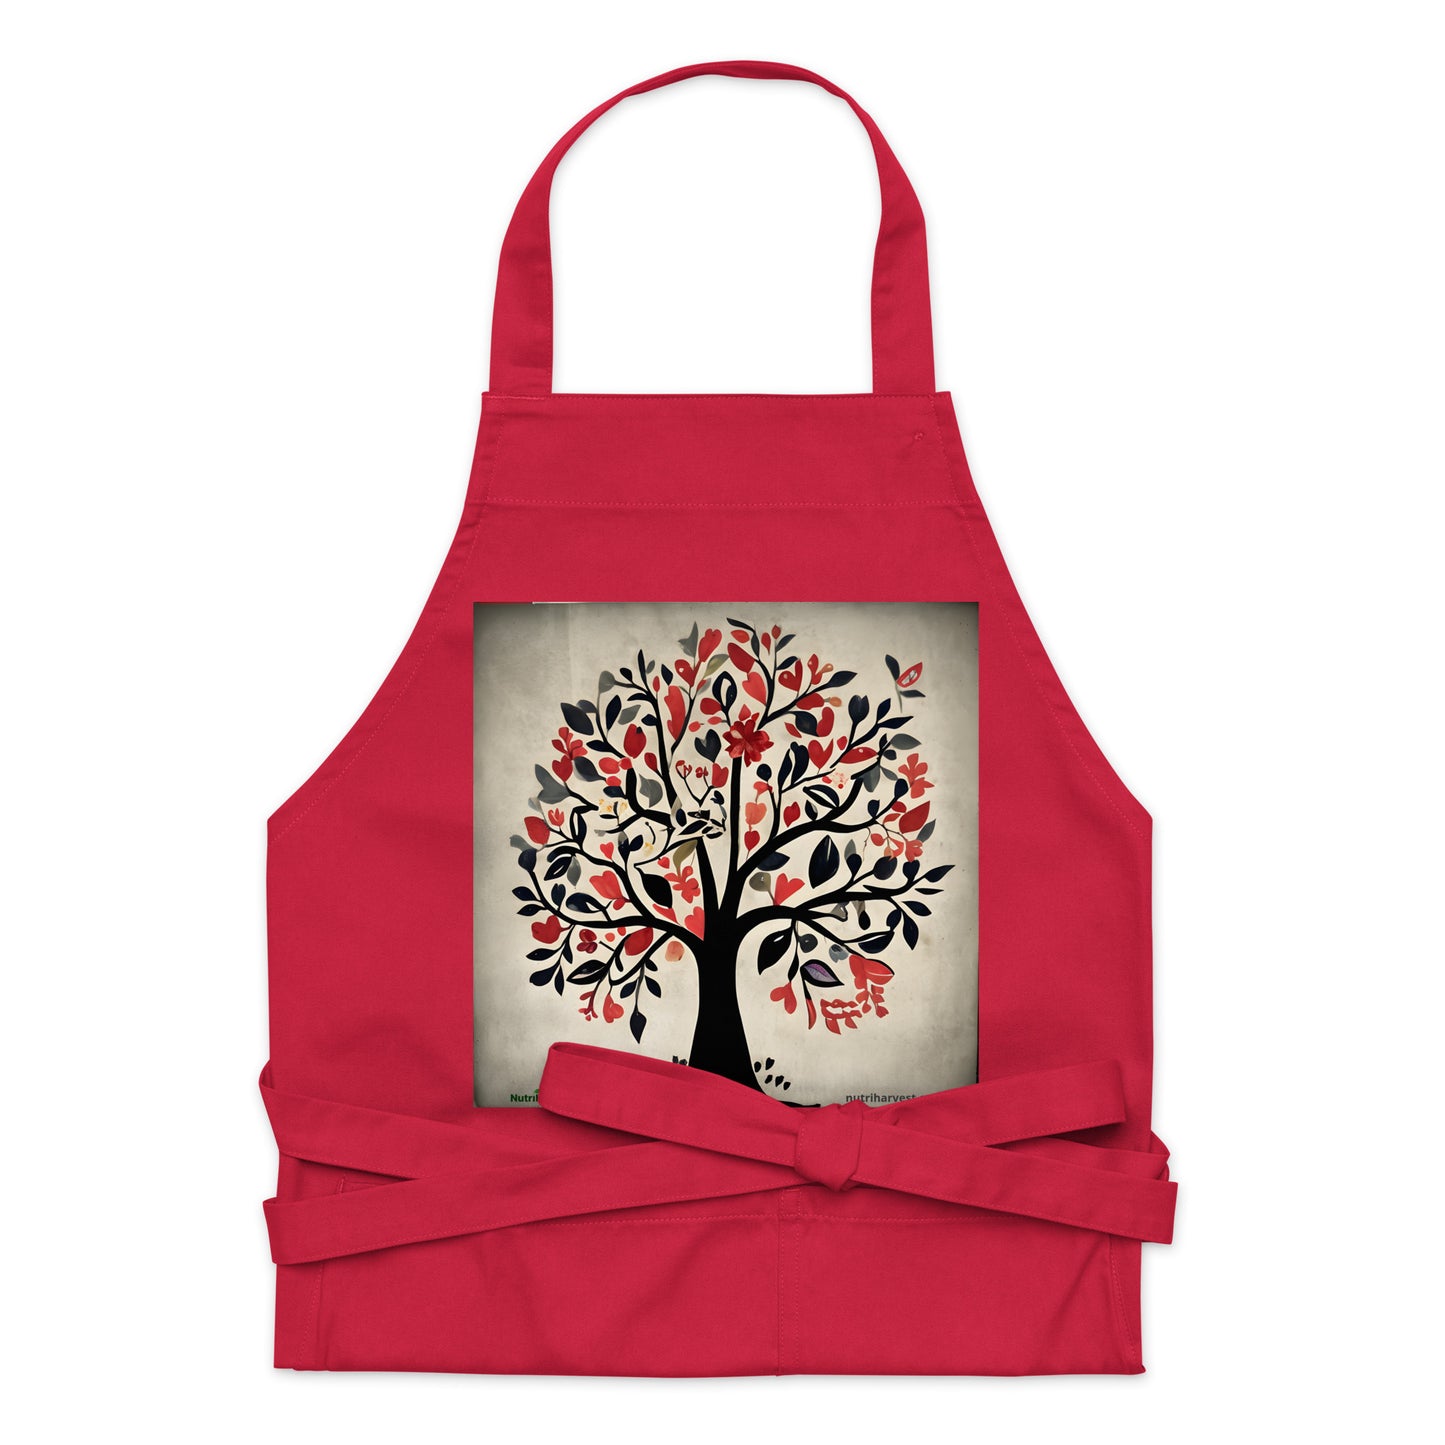 Organic Cotton Apron for Comfort and Style